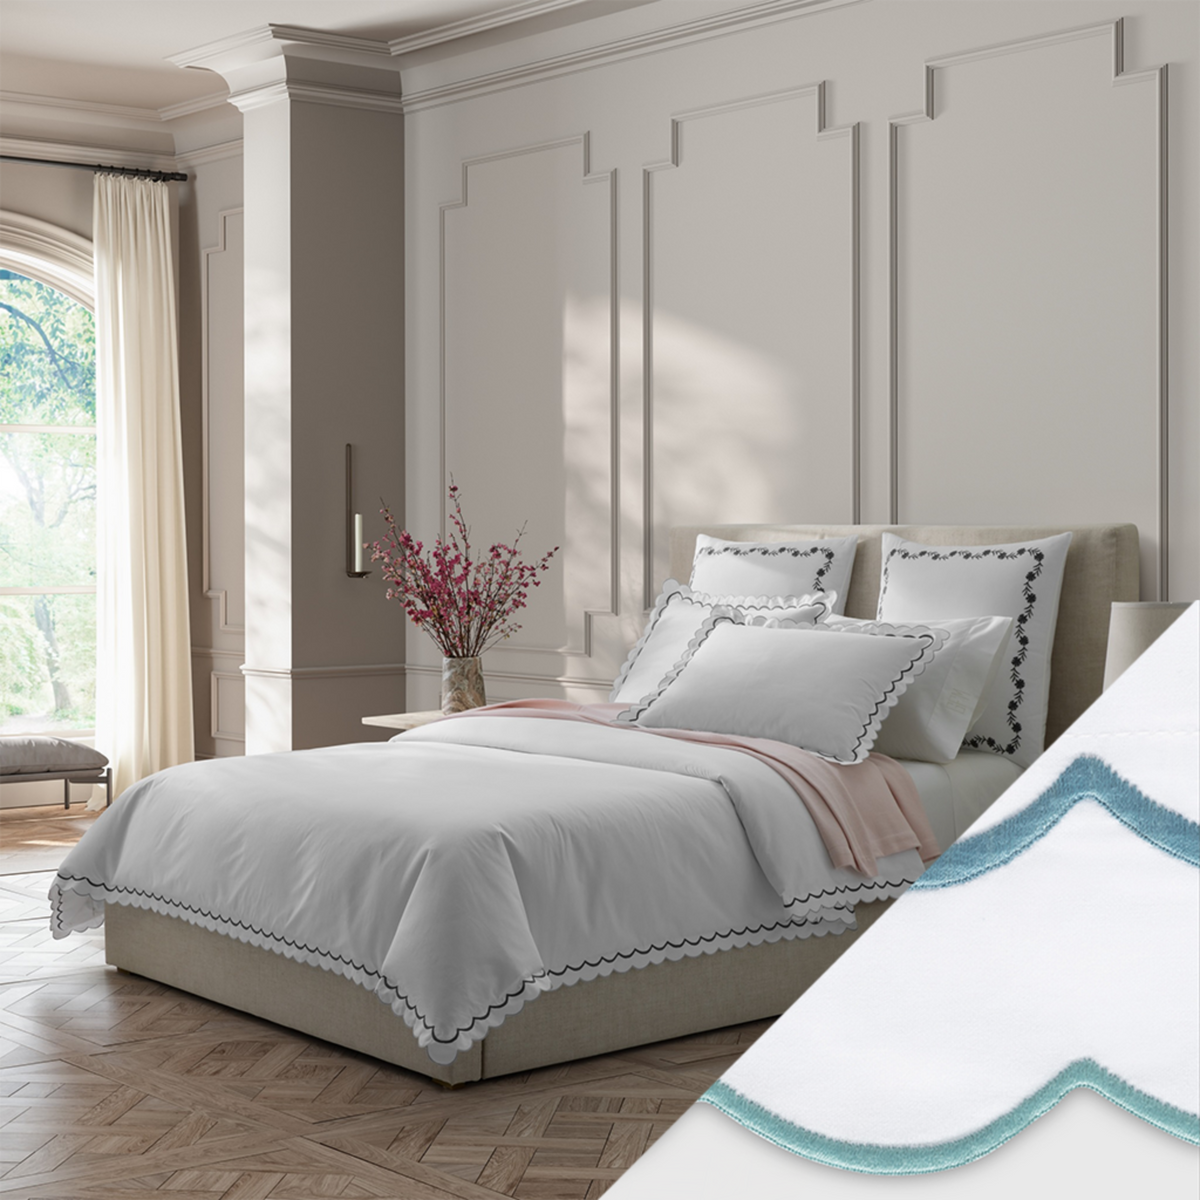 Full Bed Dressed in Matouk India Bedding in Charcoal Color with Cerulean Swatch